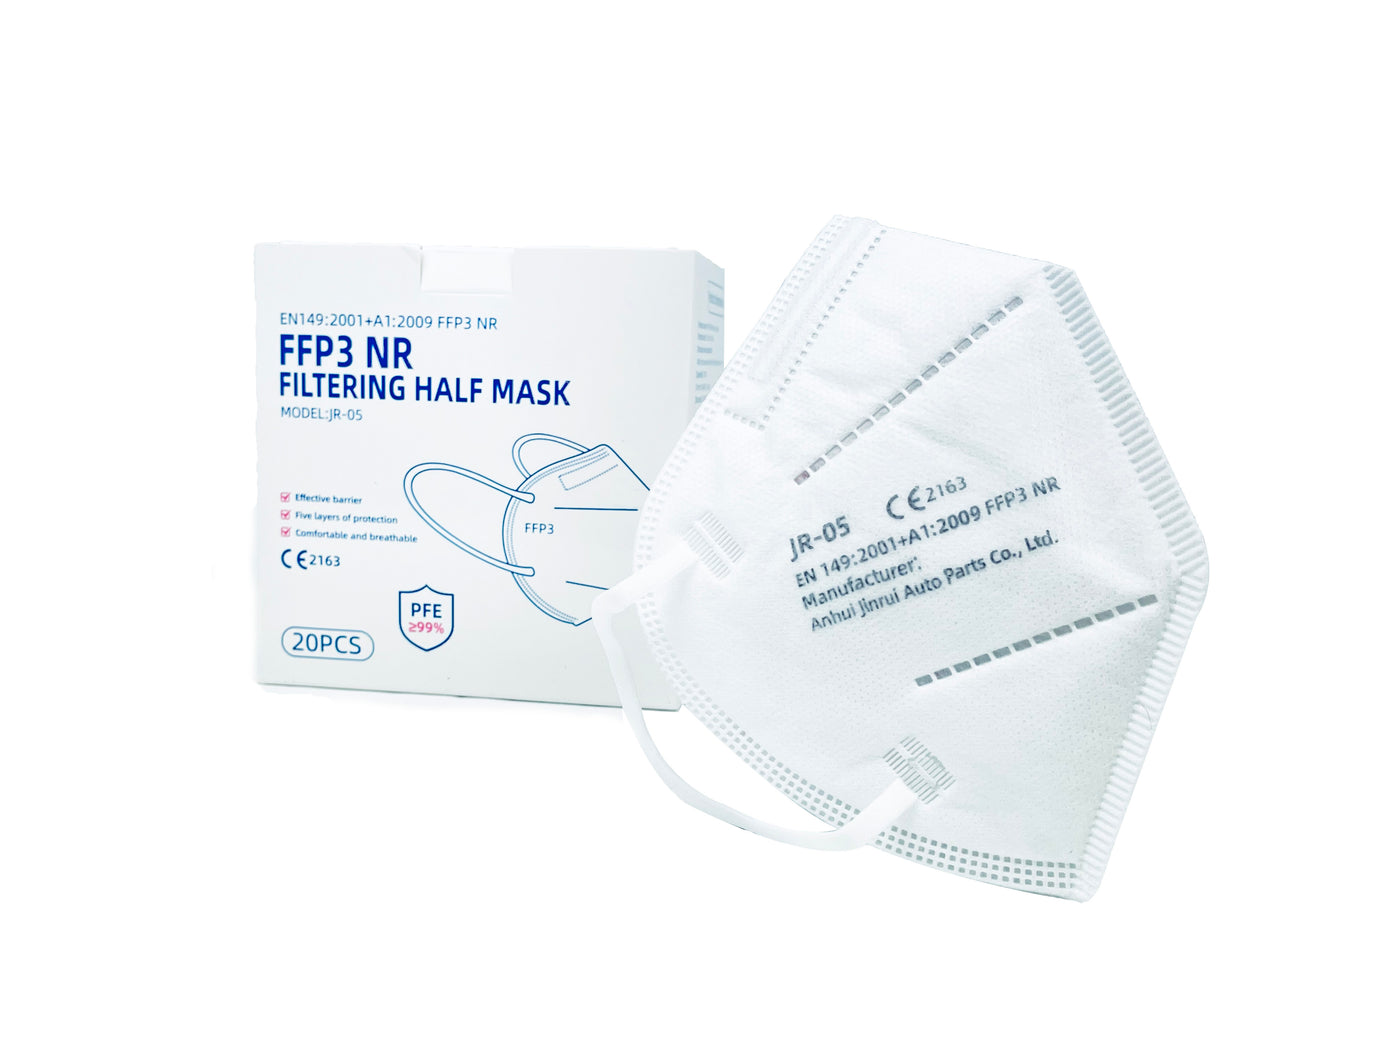 FFP3 Face Masks UK, Pack of 20,  CE 2163 Certified, 5 Layers of Protection, High BFE Filter Efficiency Of ≥99%, Easy Breathable, Recommended by Healthcare Professionals and for General Public (6838714204259)